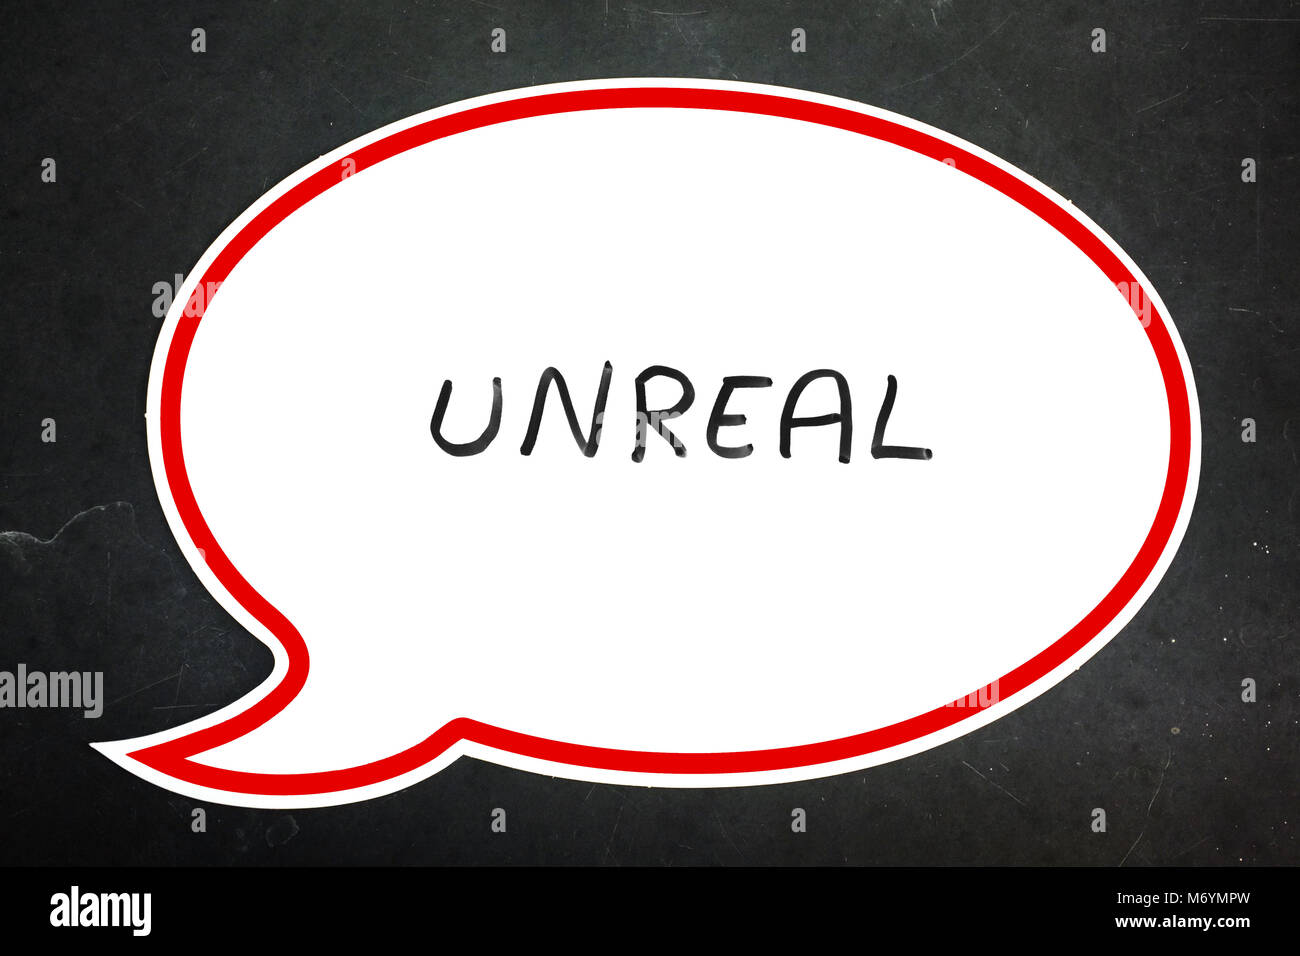 Unreal written in a speech bubble against a dark background. Stock Photo